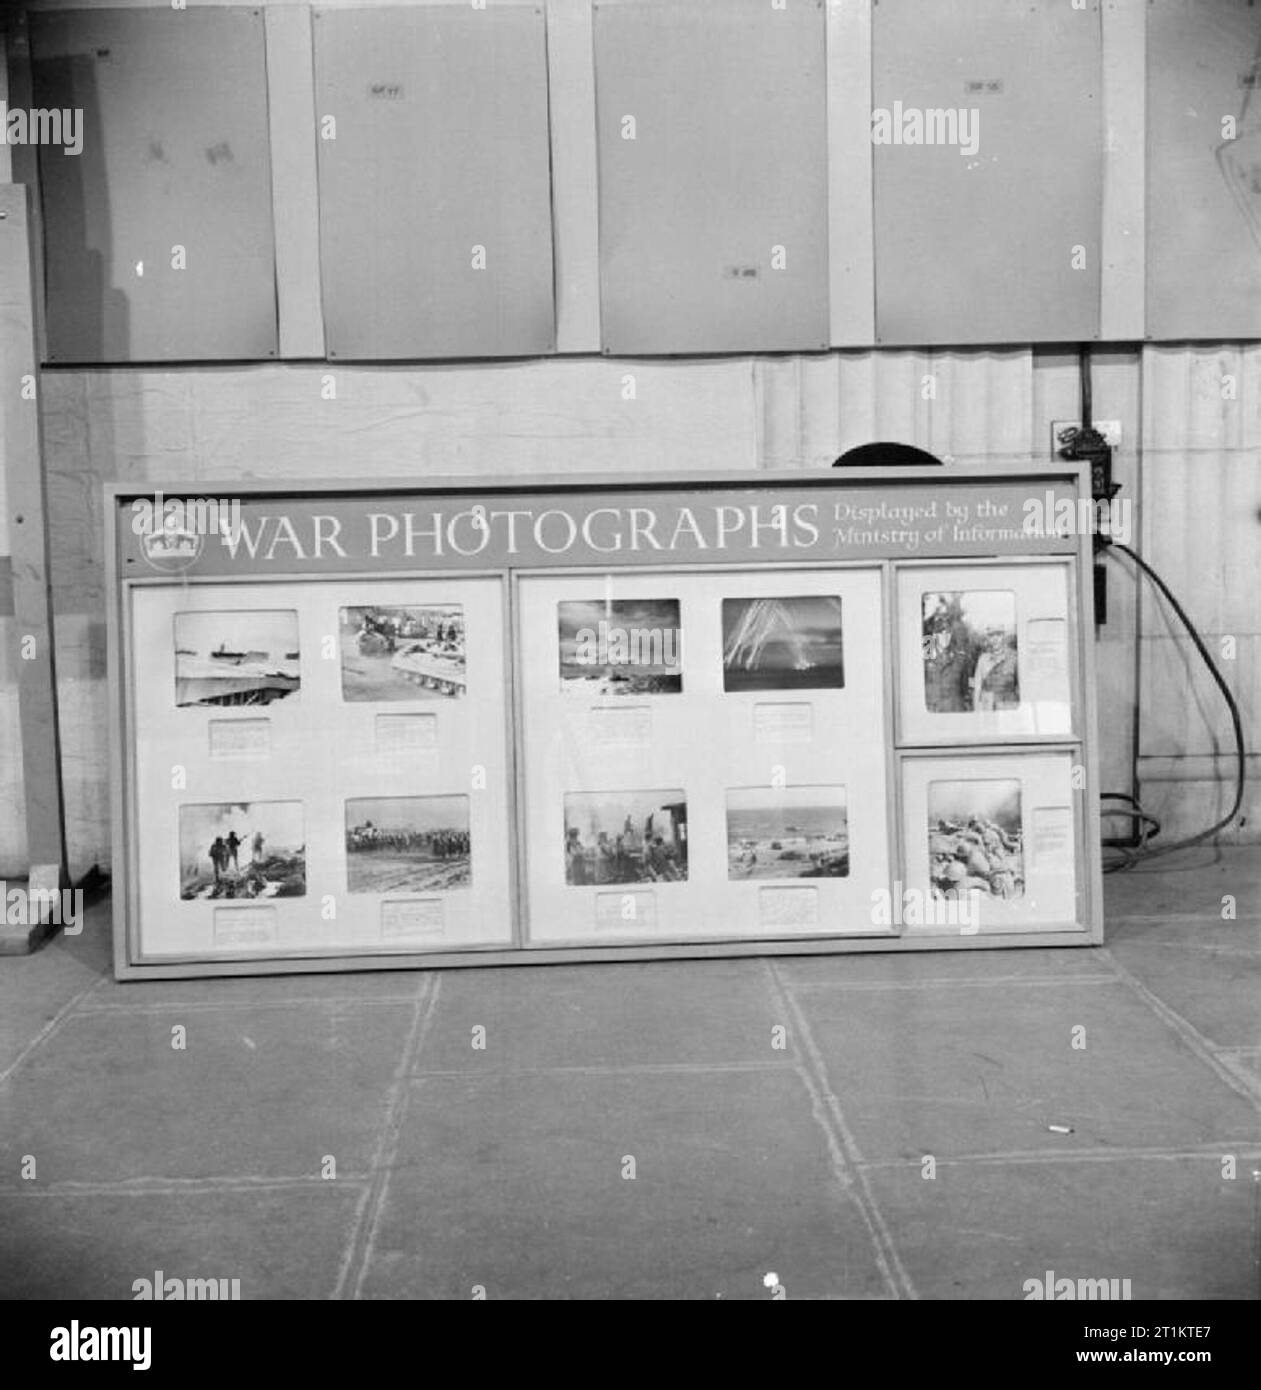 The work of the Ministry of Information during the Second World War, UK, 1942 A view of a 'topical screen', featuring ten war photographs taken by official photographers and displayed by the Ministry of Information. This photograph was taken at MoI headquarters at Senate House, London. Stock Photo